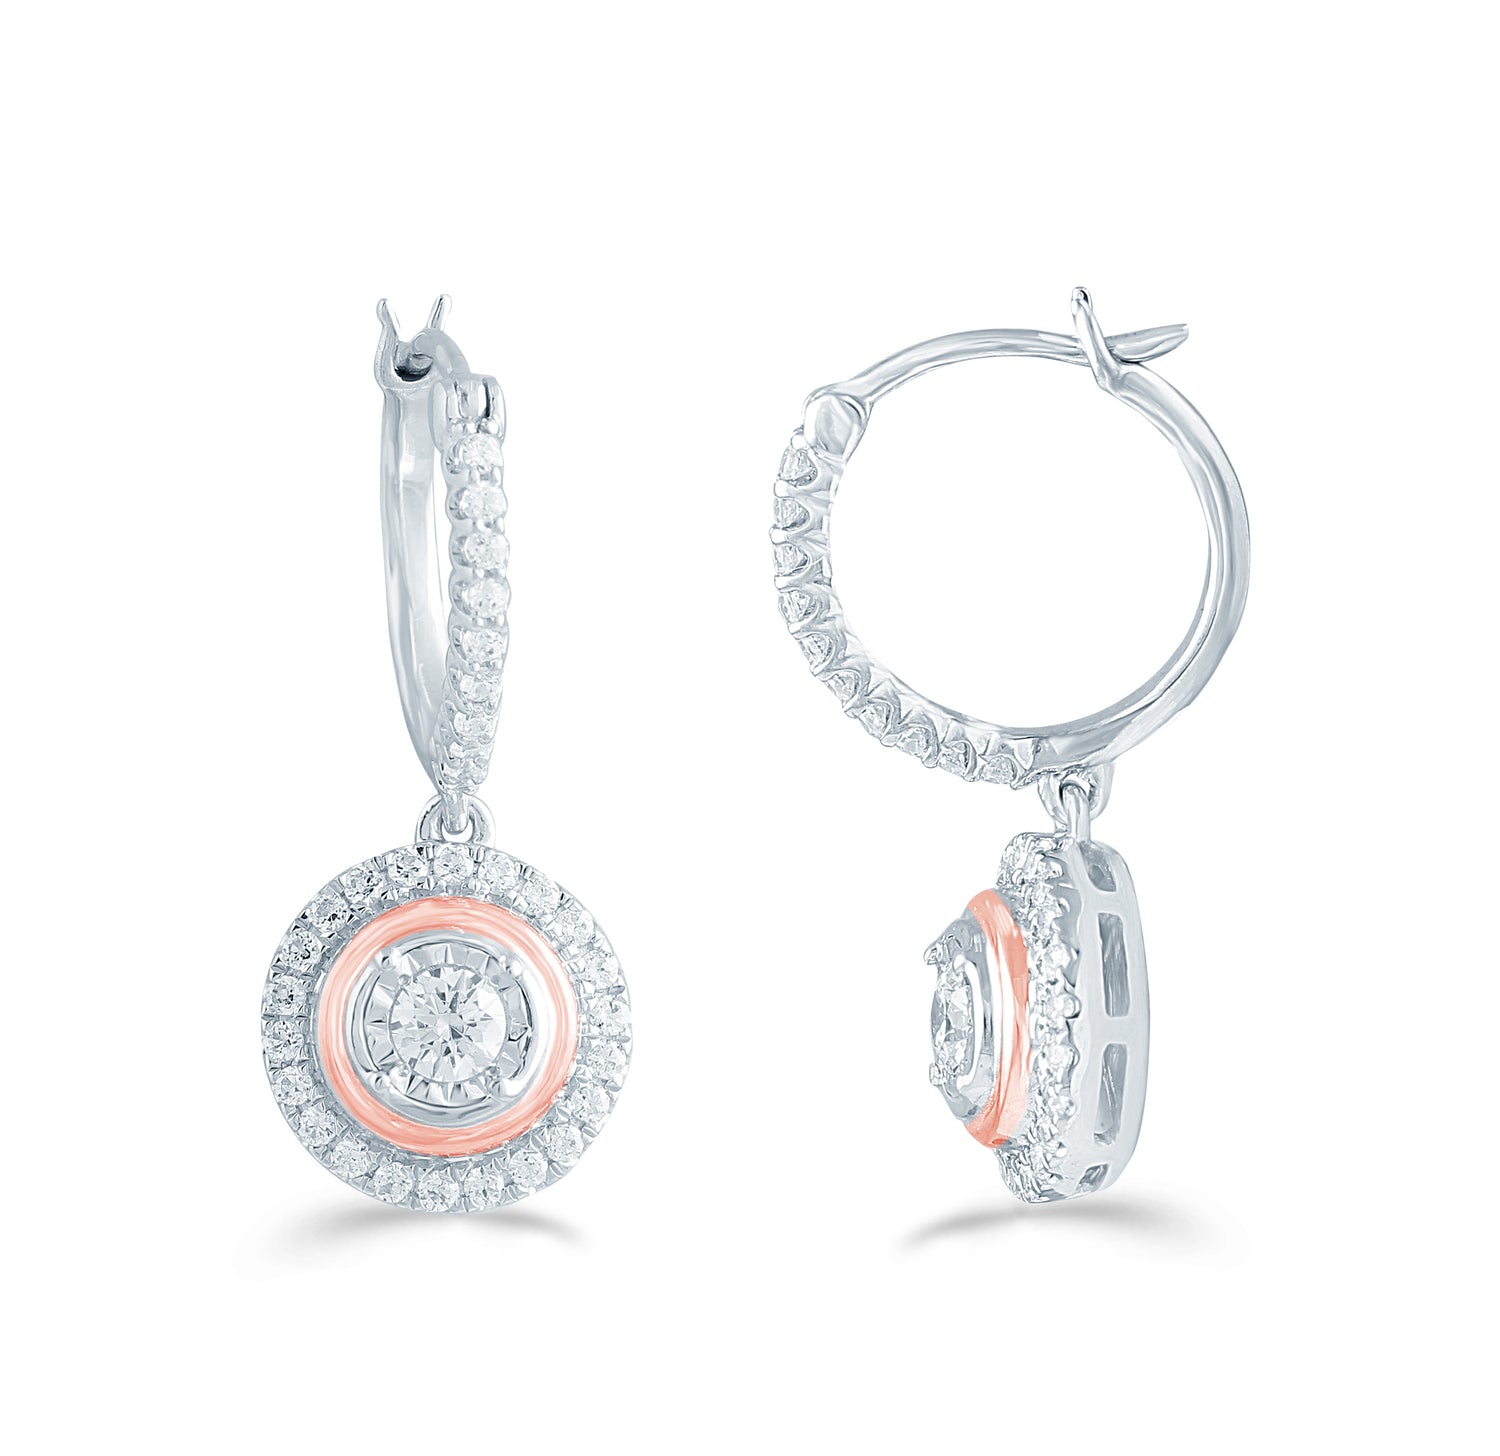 Set of 2 3/4CT TW Diamond Round Halo Fashion Pendant & Earrings in Sterling Silver & 10K Rose gold